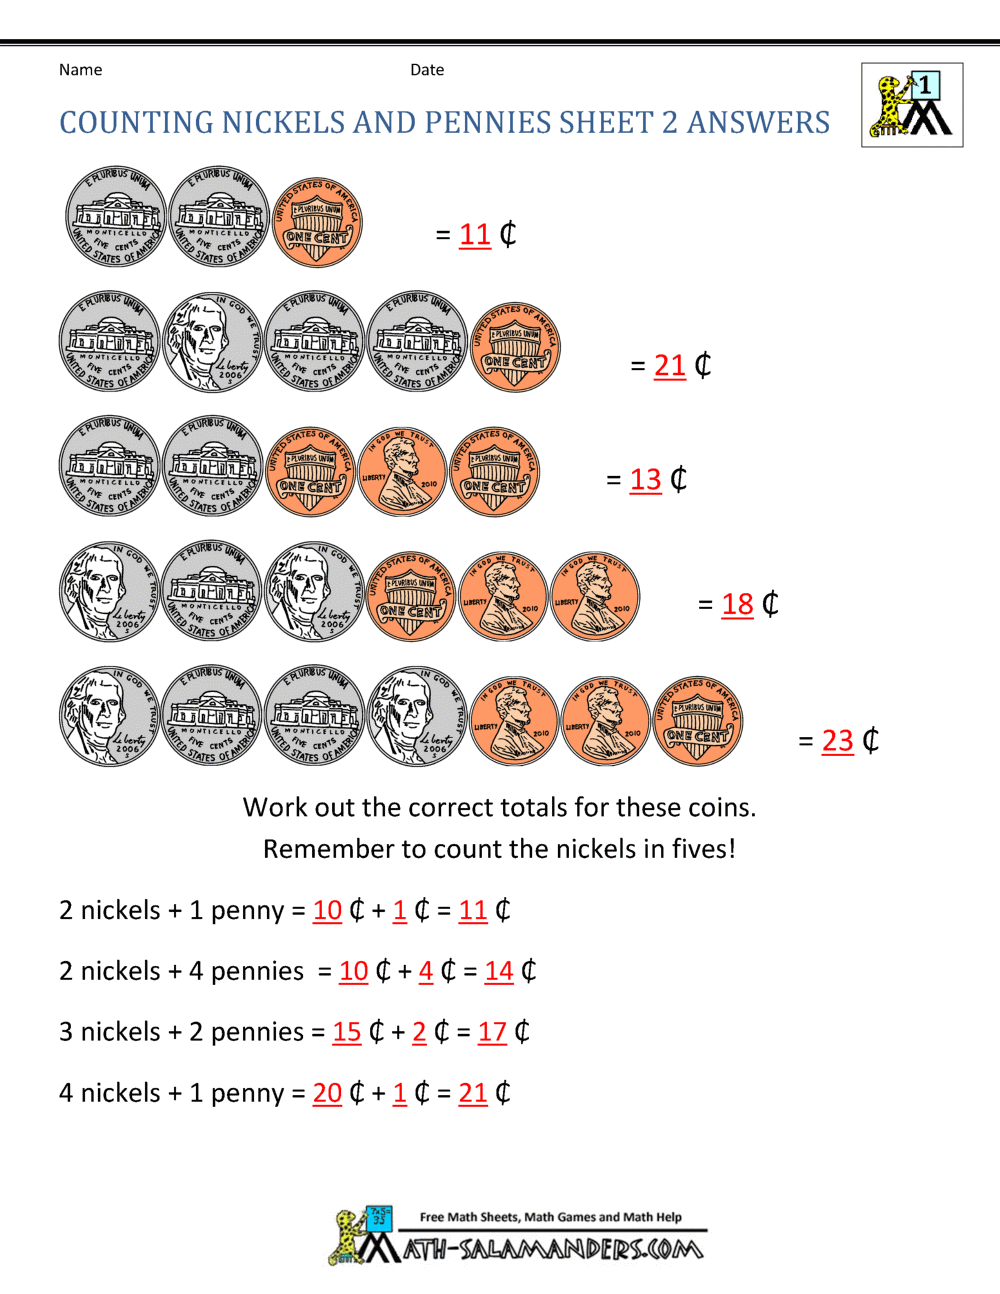 Counting Money Worksheets 1st Grade math worksheets, education, printable worksheets, worksheets for teachers, and alphabet worksheets Currency Conversions Worksheet 2 1294 x 1000